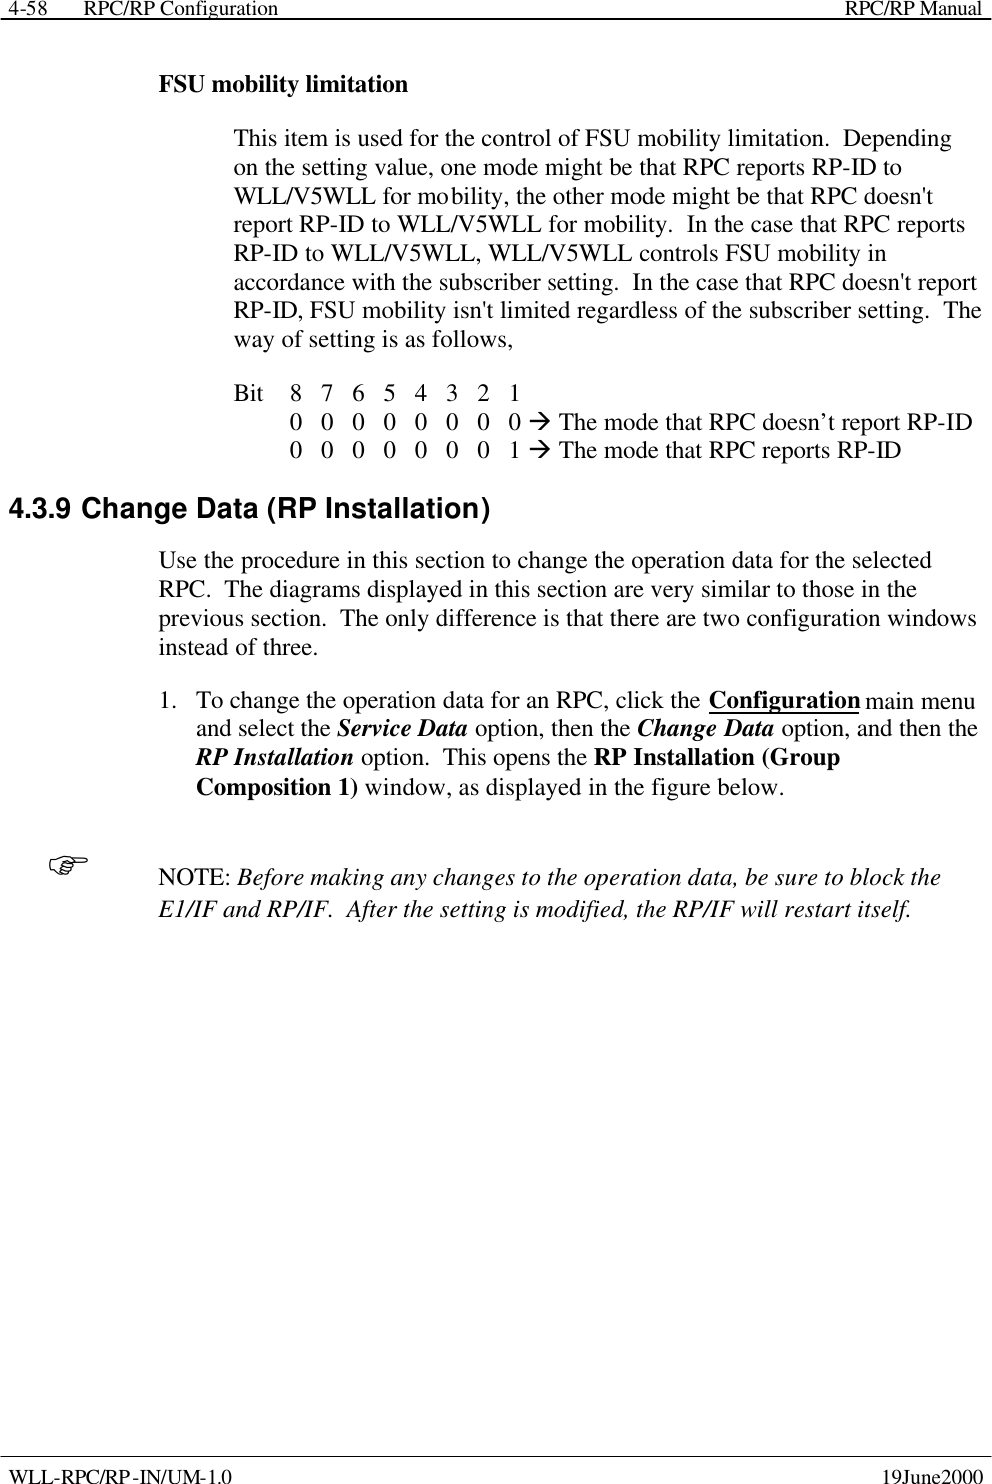  RPC/RP Configuration    RPC/RP Manual   WLL-RPC/RP-IN/UM-1.0    19June2000 4-58FSU mobility limitation  This item is used for the control of FSU mobility limitation.  Depending on the setting value, one mode might be that RPC reports RP-ID to WLL/V5WLL for mobility, the other mode might be that RPC doesn&apos;t report RP-ID to WLL/V5WLL for mobility.  In the case that RPC reports RP-ID to WLL/V5WLL, WLL/V5WLL controls FSU mobility in accordance with the subscriber setting.  In the case that RPC doesn&apos;t report RP-ID, FSU mobility isn&apos;t limited regardless of the subscriber setting.  The way of setting is as follows, Bit    8   7   6   5   4   3   2   1       0   0   0   0   0   0   0   0 à The mode that RPC doesn’t report RP-ID      0   0   0   0   0   0   0   1 à The mode that RPC reports RP-ID 4.3.9 Change Data (RP Installation) Use the procedure in this section to change the operation data for the selected RPC.  The diagrams displayed in this section are very similar to those in the previous section.  The only difference is that there are two configuration windows instead of three. 1.  To change the operation data for an RPC, click the Configuration main menu and select the Service Data option, then the Change Data option, and then the RP Installation option.  This opens the RP Installation (Group Composition 1) window, as displayed in the figure below. F NOTE: Before making any changes to the operation data, be sure to block the E1/IF and RP/IF.  After the setting is modified, the RP/IF will restart itself. 